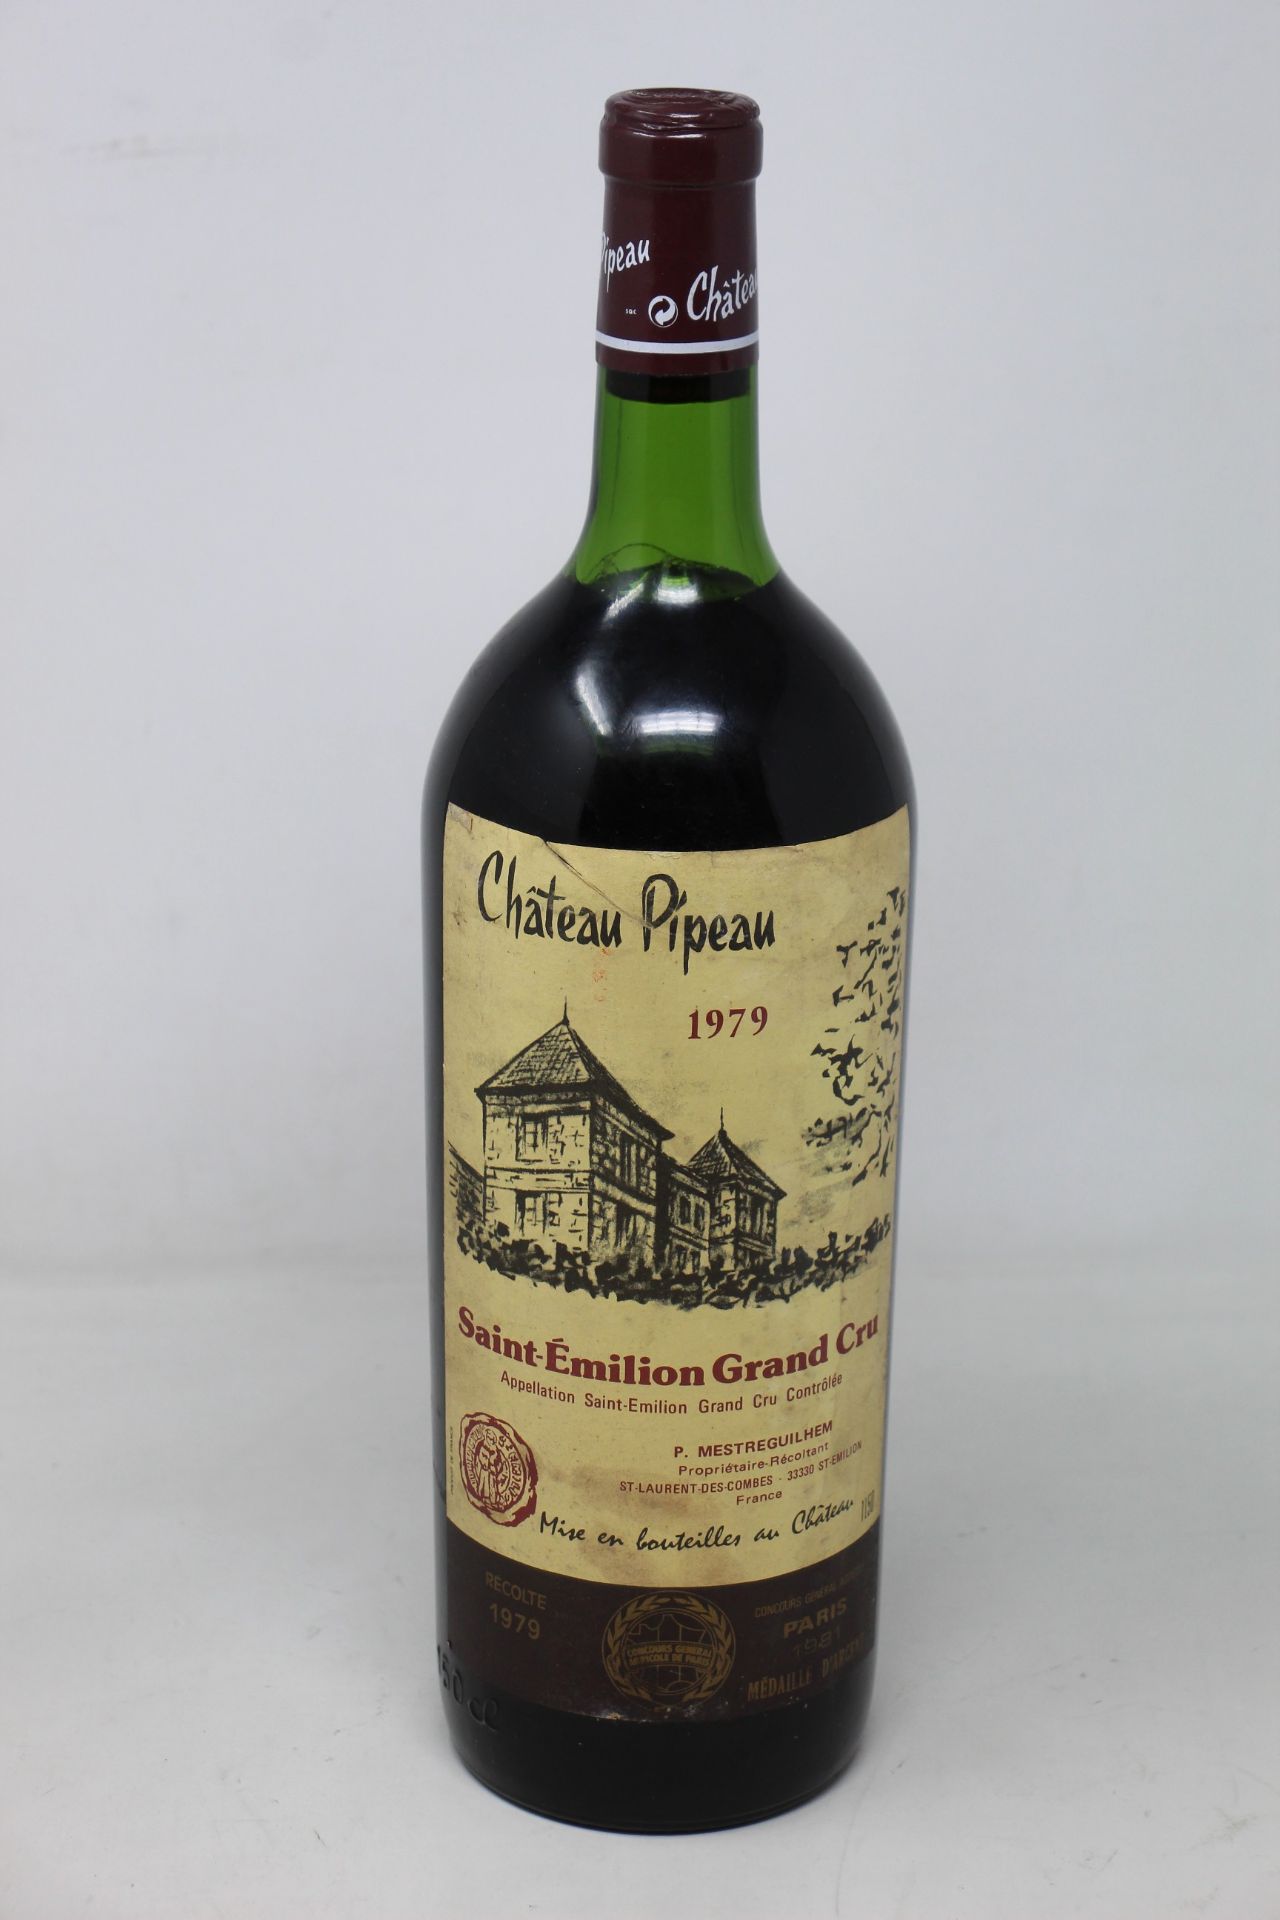 A bottle of Chateau Pipeau 1979 Saint Emilion Grand Cru (1.5 ltr) (Over 18's only).